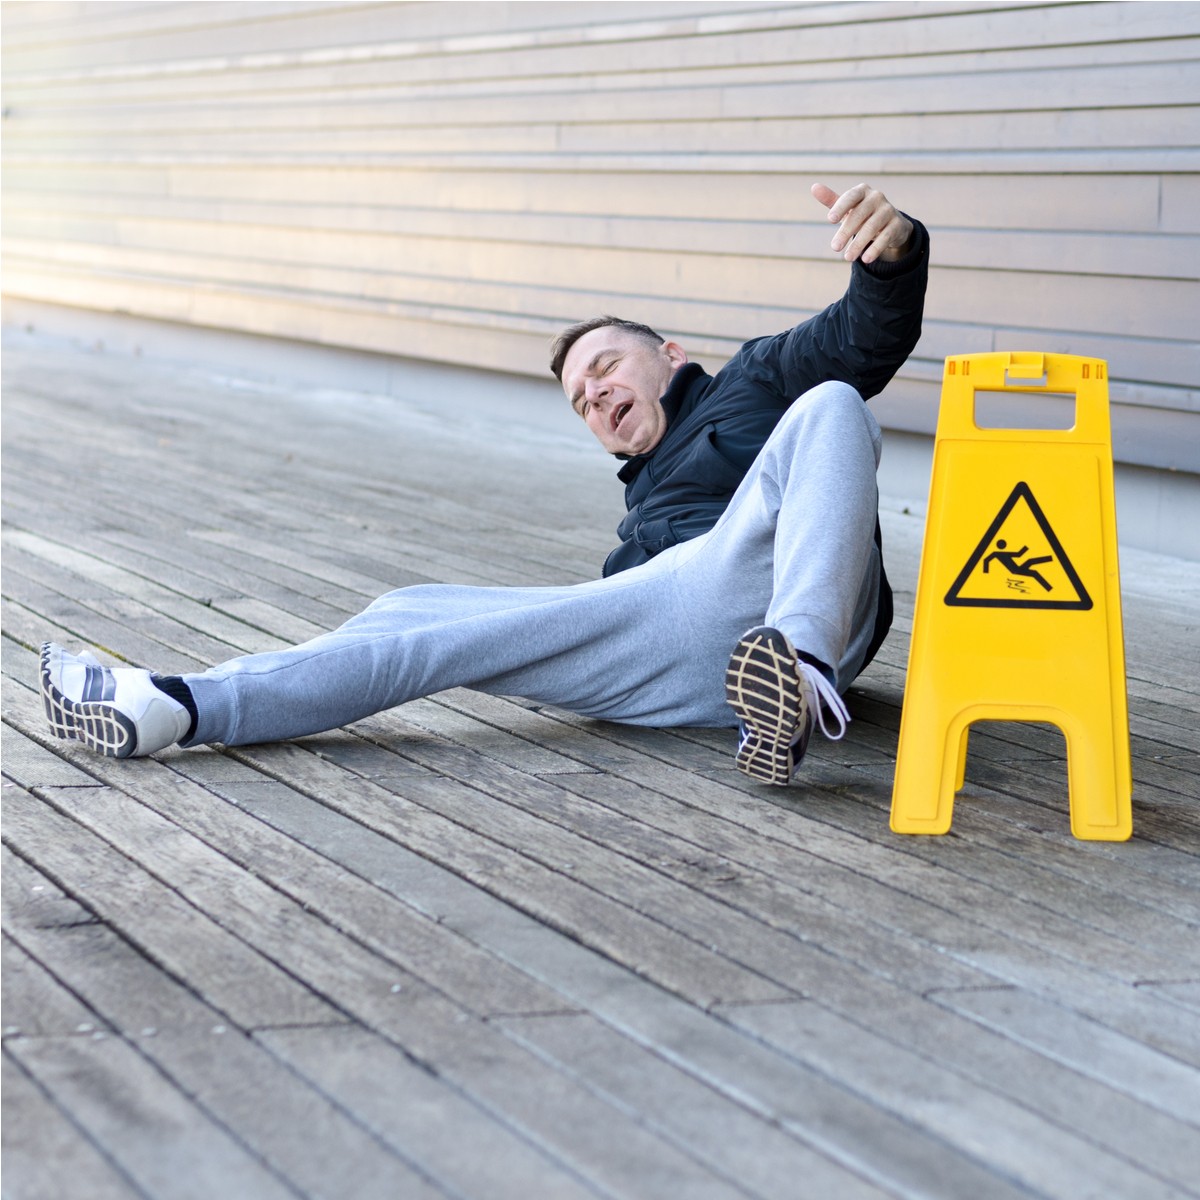 slips falls and trips in the workplace